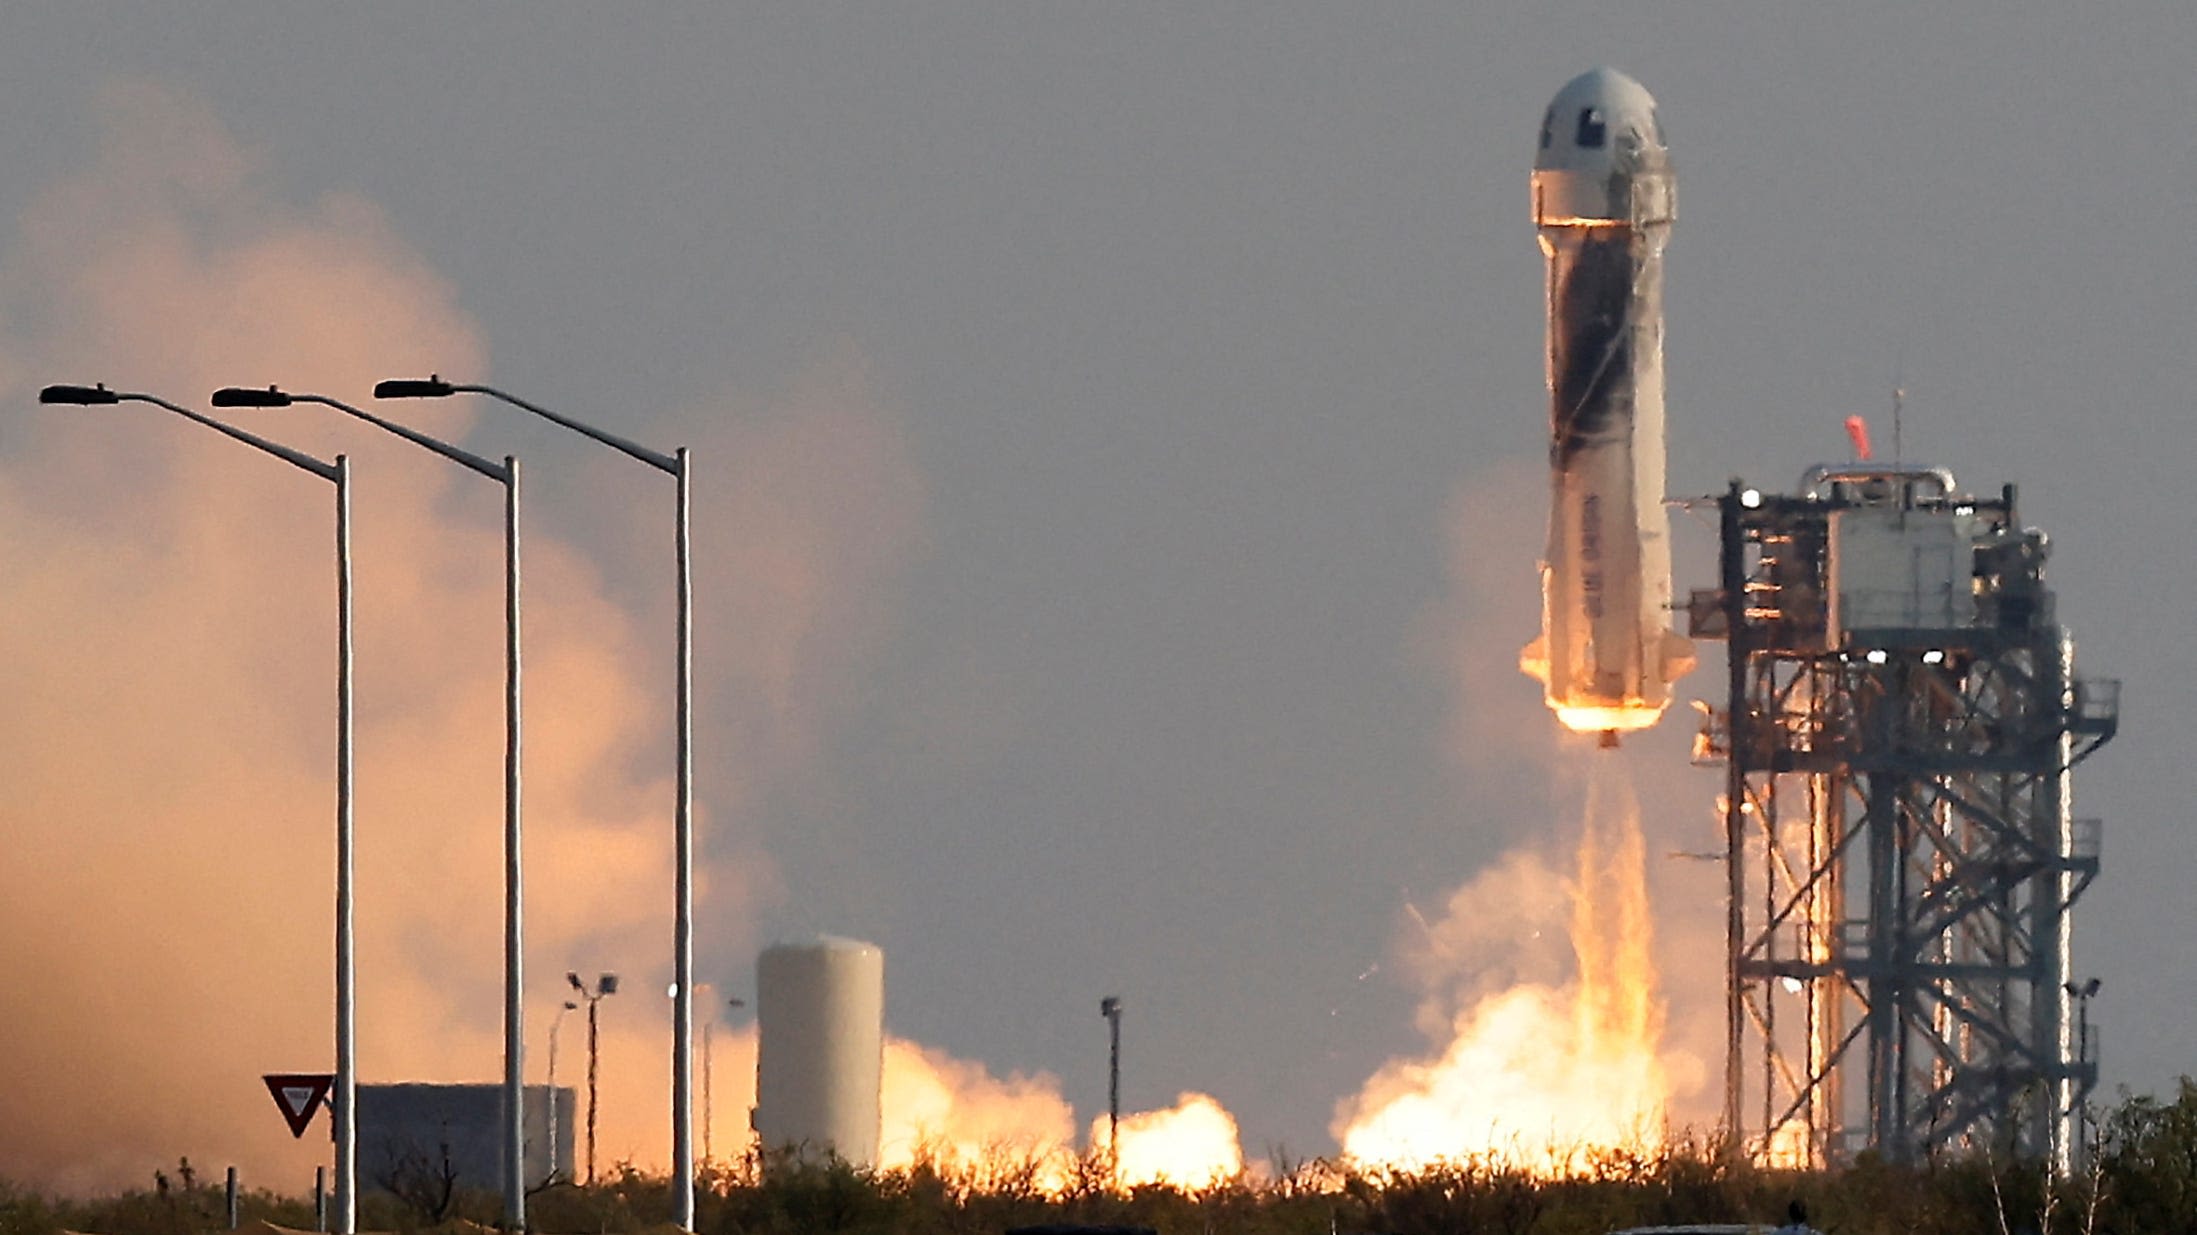 Blue Origin preparing return to crewed space flights, nearly 2 years after failed mission